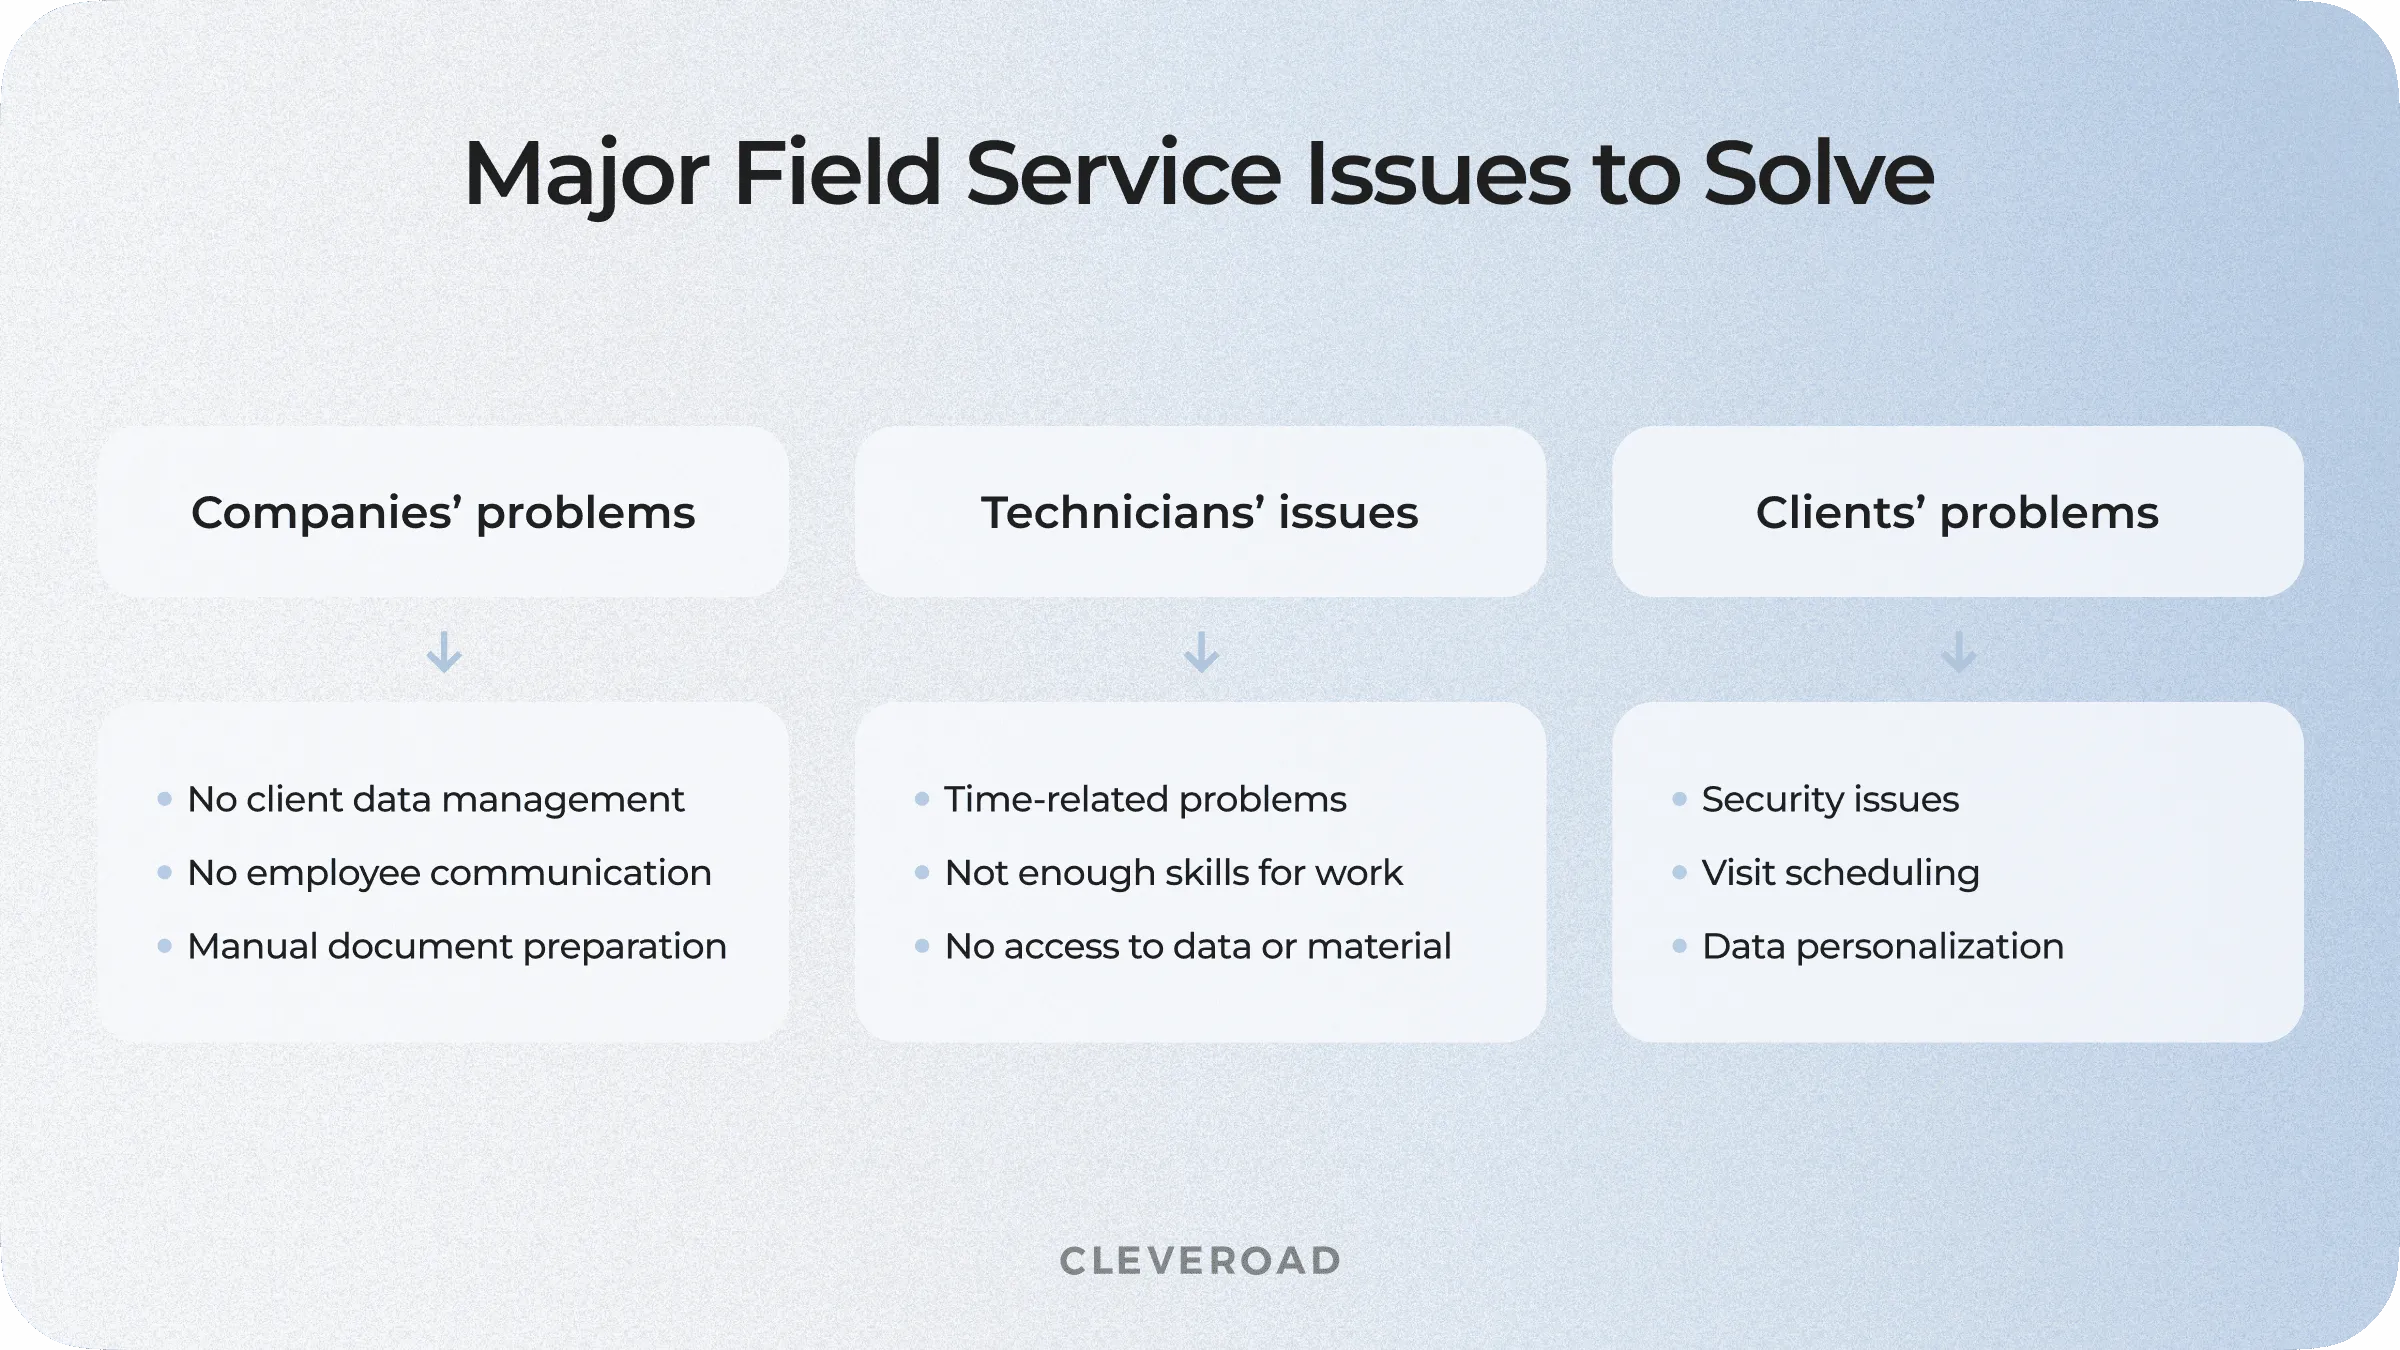 Major field service issues to solve